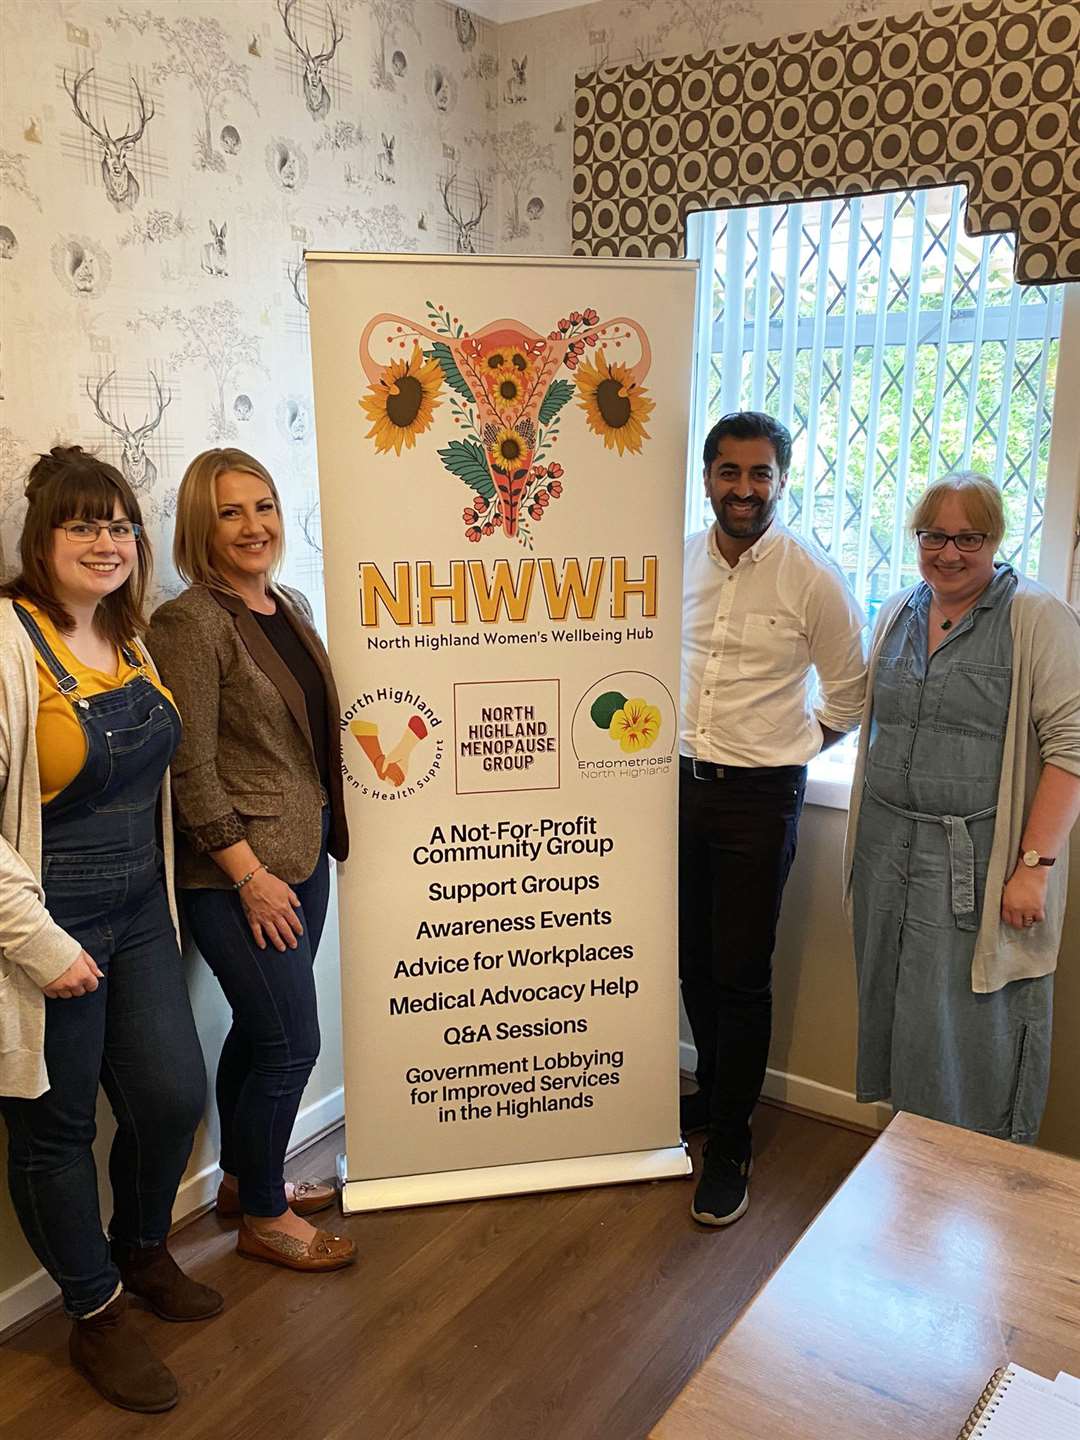 Humza Yousaf in Wick with North Highland Women’s Wellbeing Hub representatives (from left) Rebecca Wymer, Claire Clark and Kirsteen Campbell in August last year. Mr Yousaf was still Scotland's health secretary at that point – he was appointed as First Minister in March 2023.